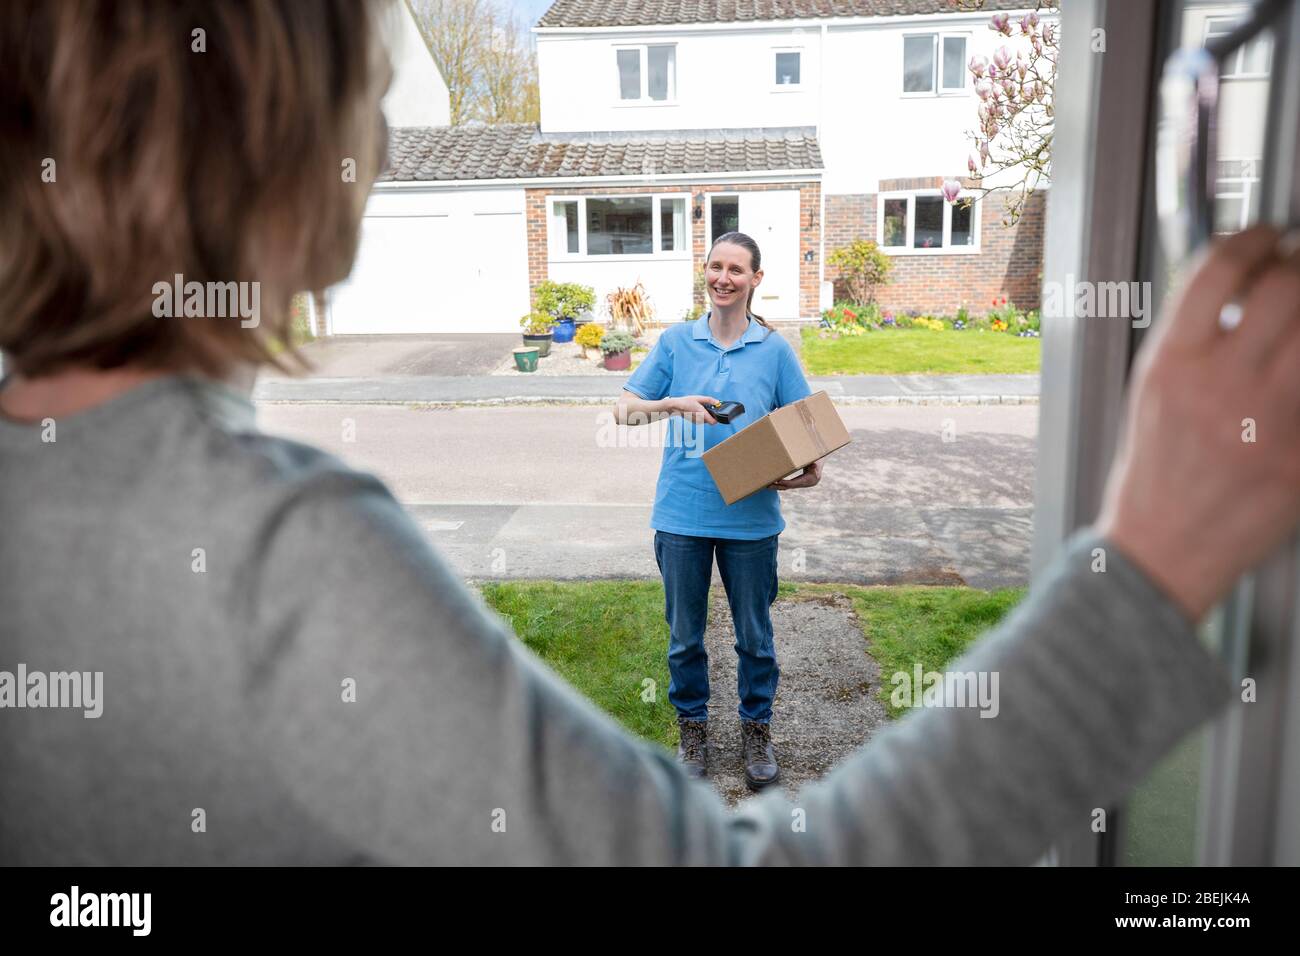 Female Delivery Driver Leaving Package Outside House For Safety Observing Social Distancing During Coronavirus Pandemic Stock Photo